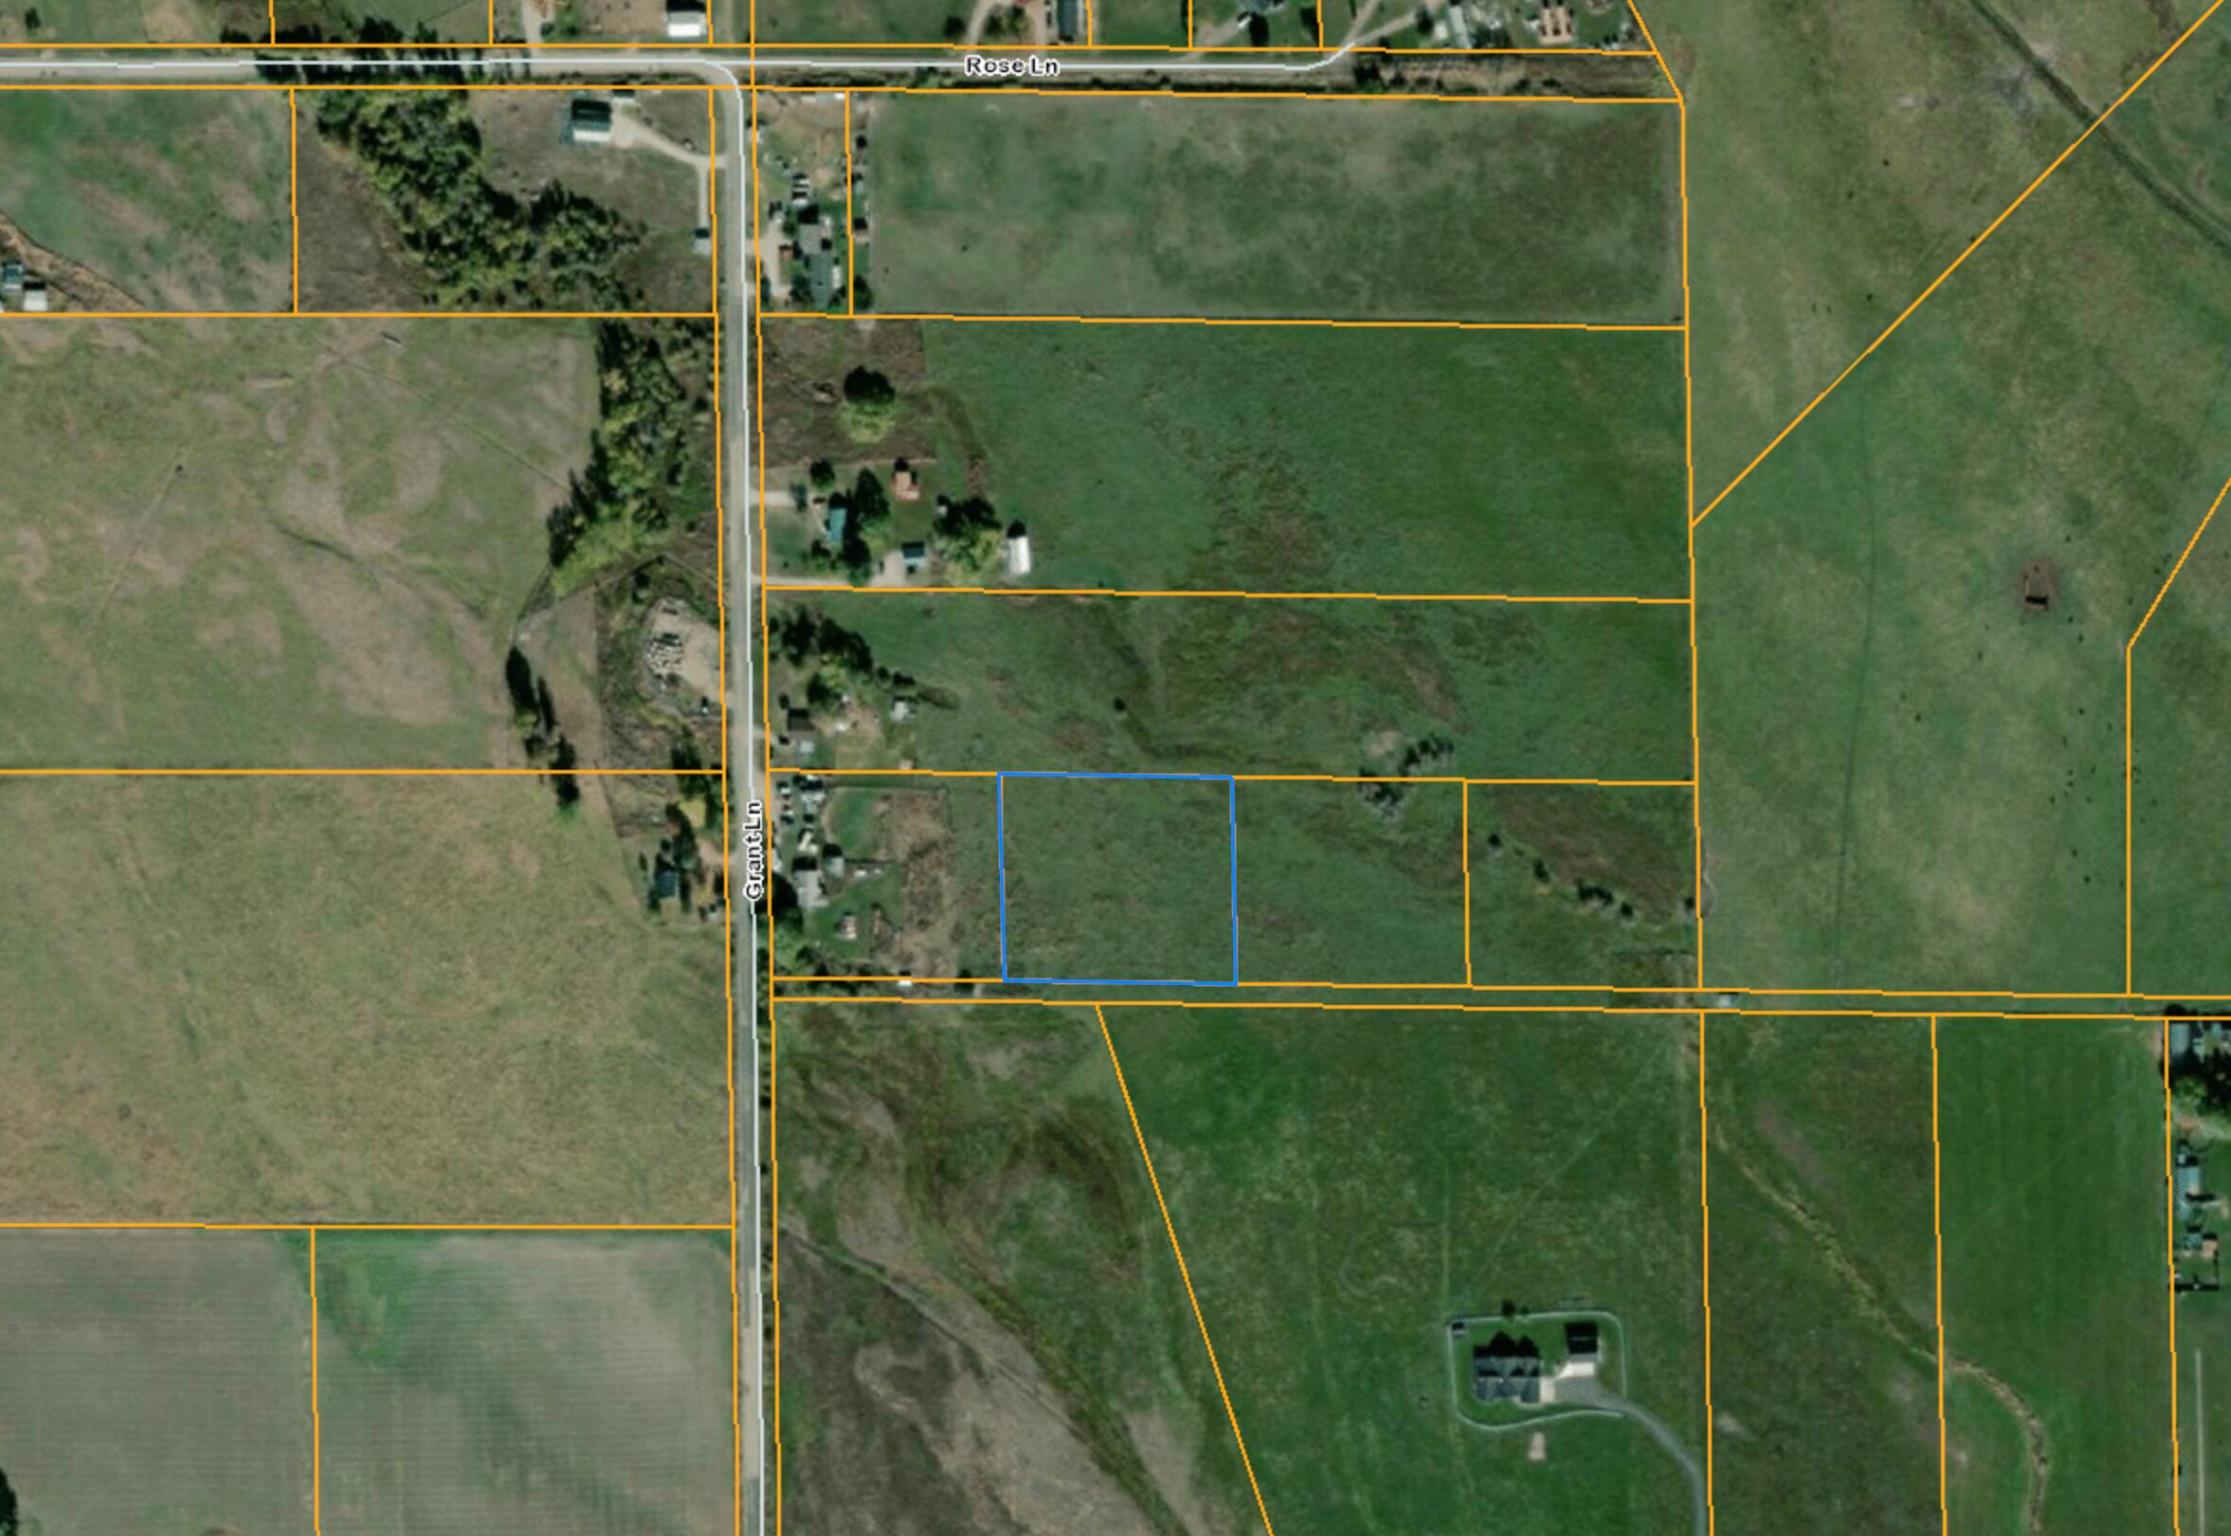 Here is an opportunity to purchase 2.25 acres in the beautiful Bitterroot Valley.  Need more space?   An adjoining 2.25 acres (Lot 8C) is also available for purchase.  Property being sold ''as is'' -- No septic approval and no access road (McKinley Street) installed.  Buyer(s) will be responsible to seek County septic approval at Buyer(s) expense (past failed perc tests). Please reference the ''Documents'' tab for additional detailed property information. West neighbor has a sand mound septic system. Call JoyceAnne Jodsaas at 406-239-5726, or your real estate professional for showing instructions.